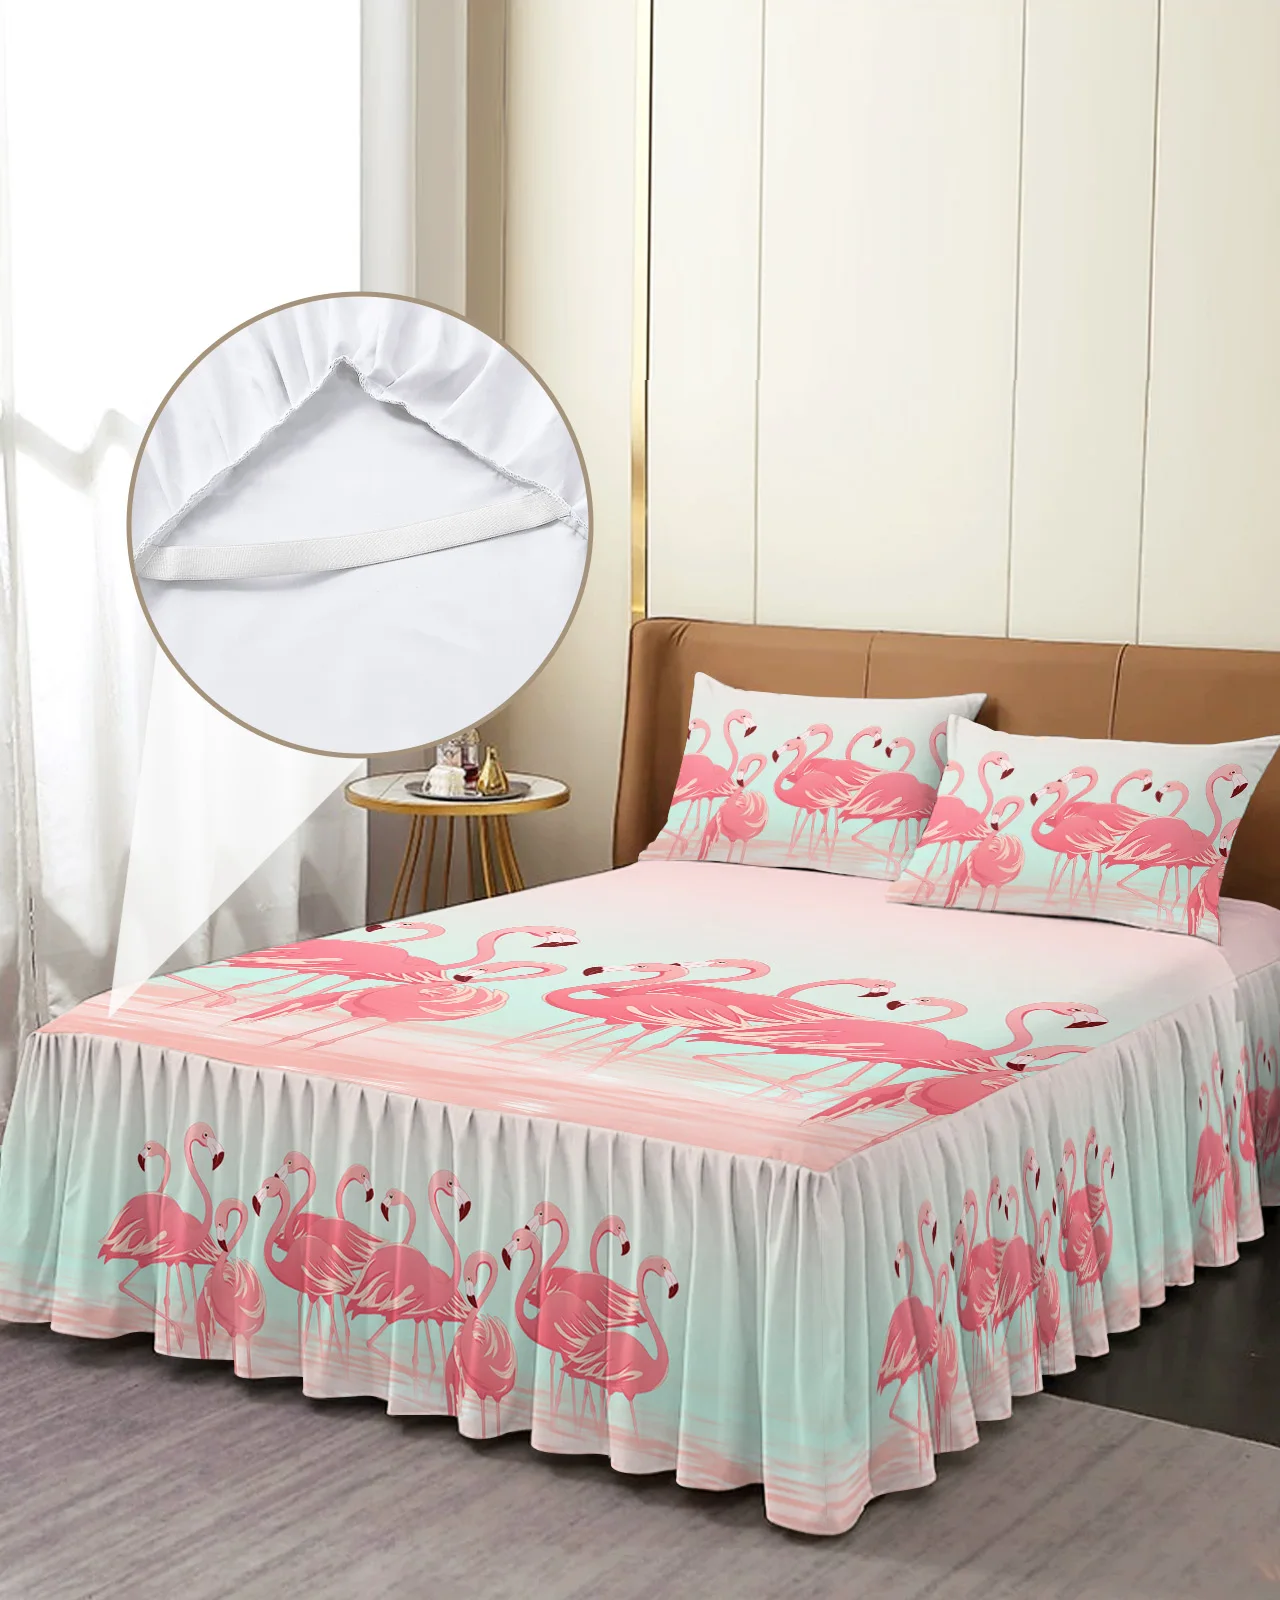 

Tropical Animal Flamingo Bed Skirt Elastic Fitted Bedspread With Pillowcases Bed Protector Mattress Cover Bedding Set Bed Sheet